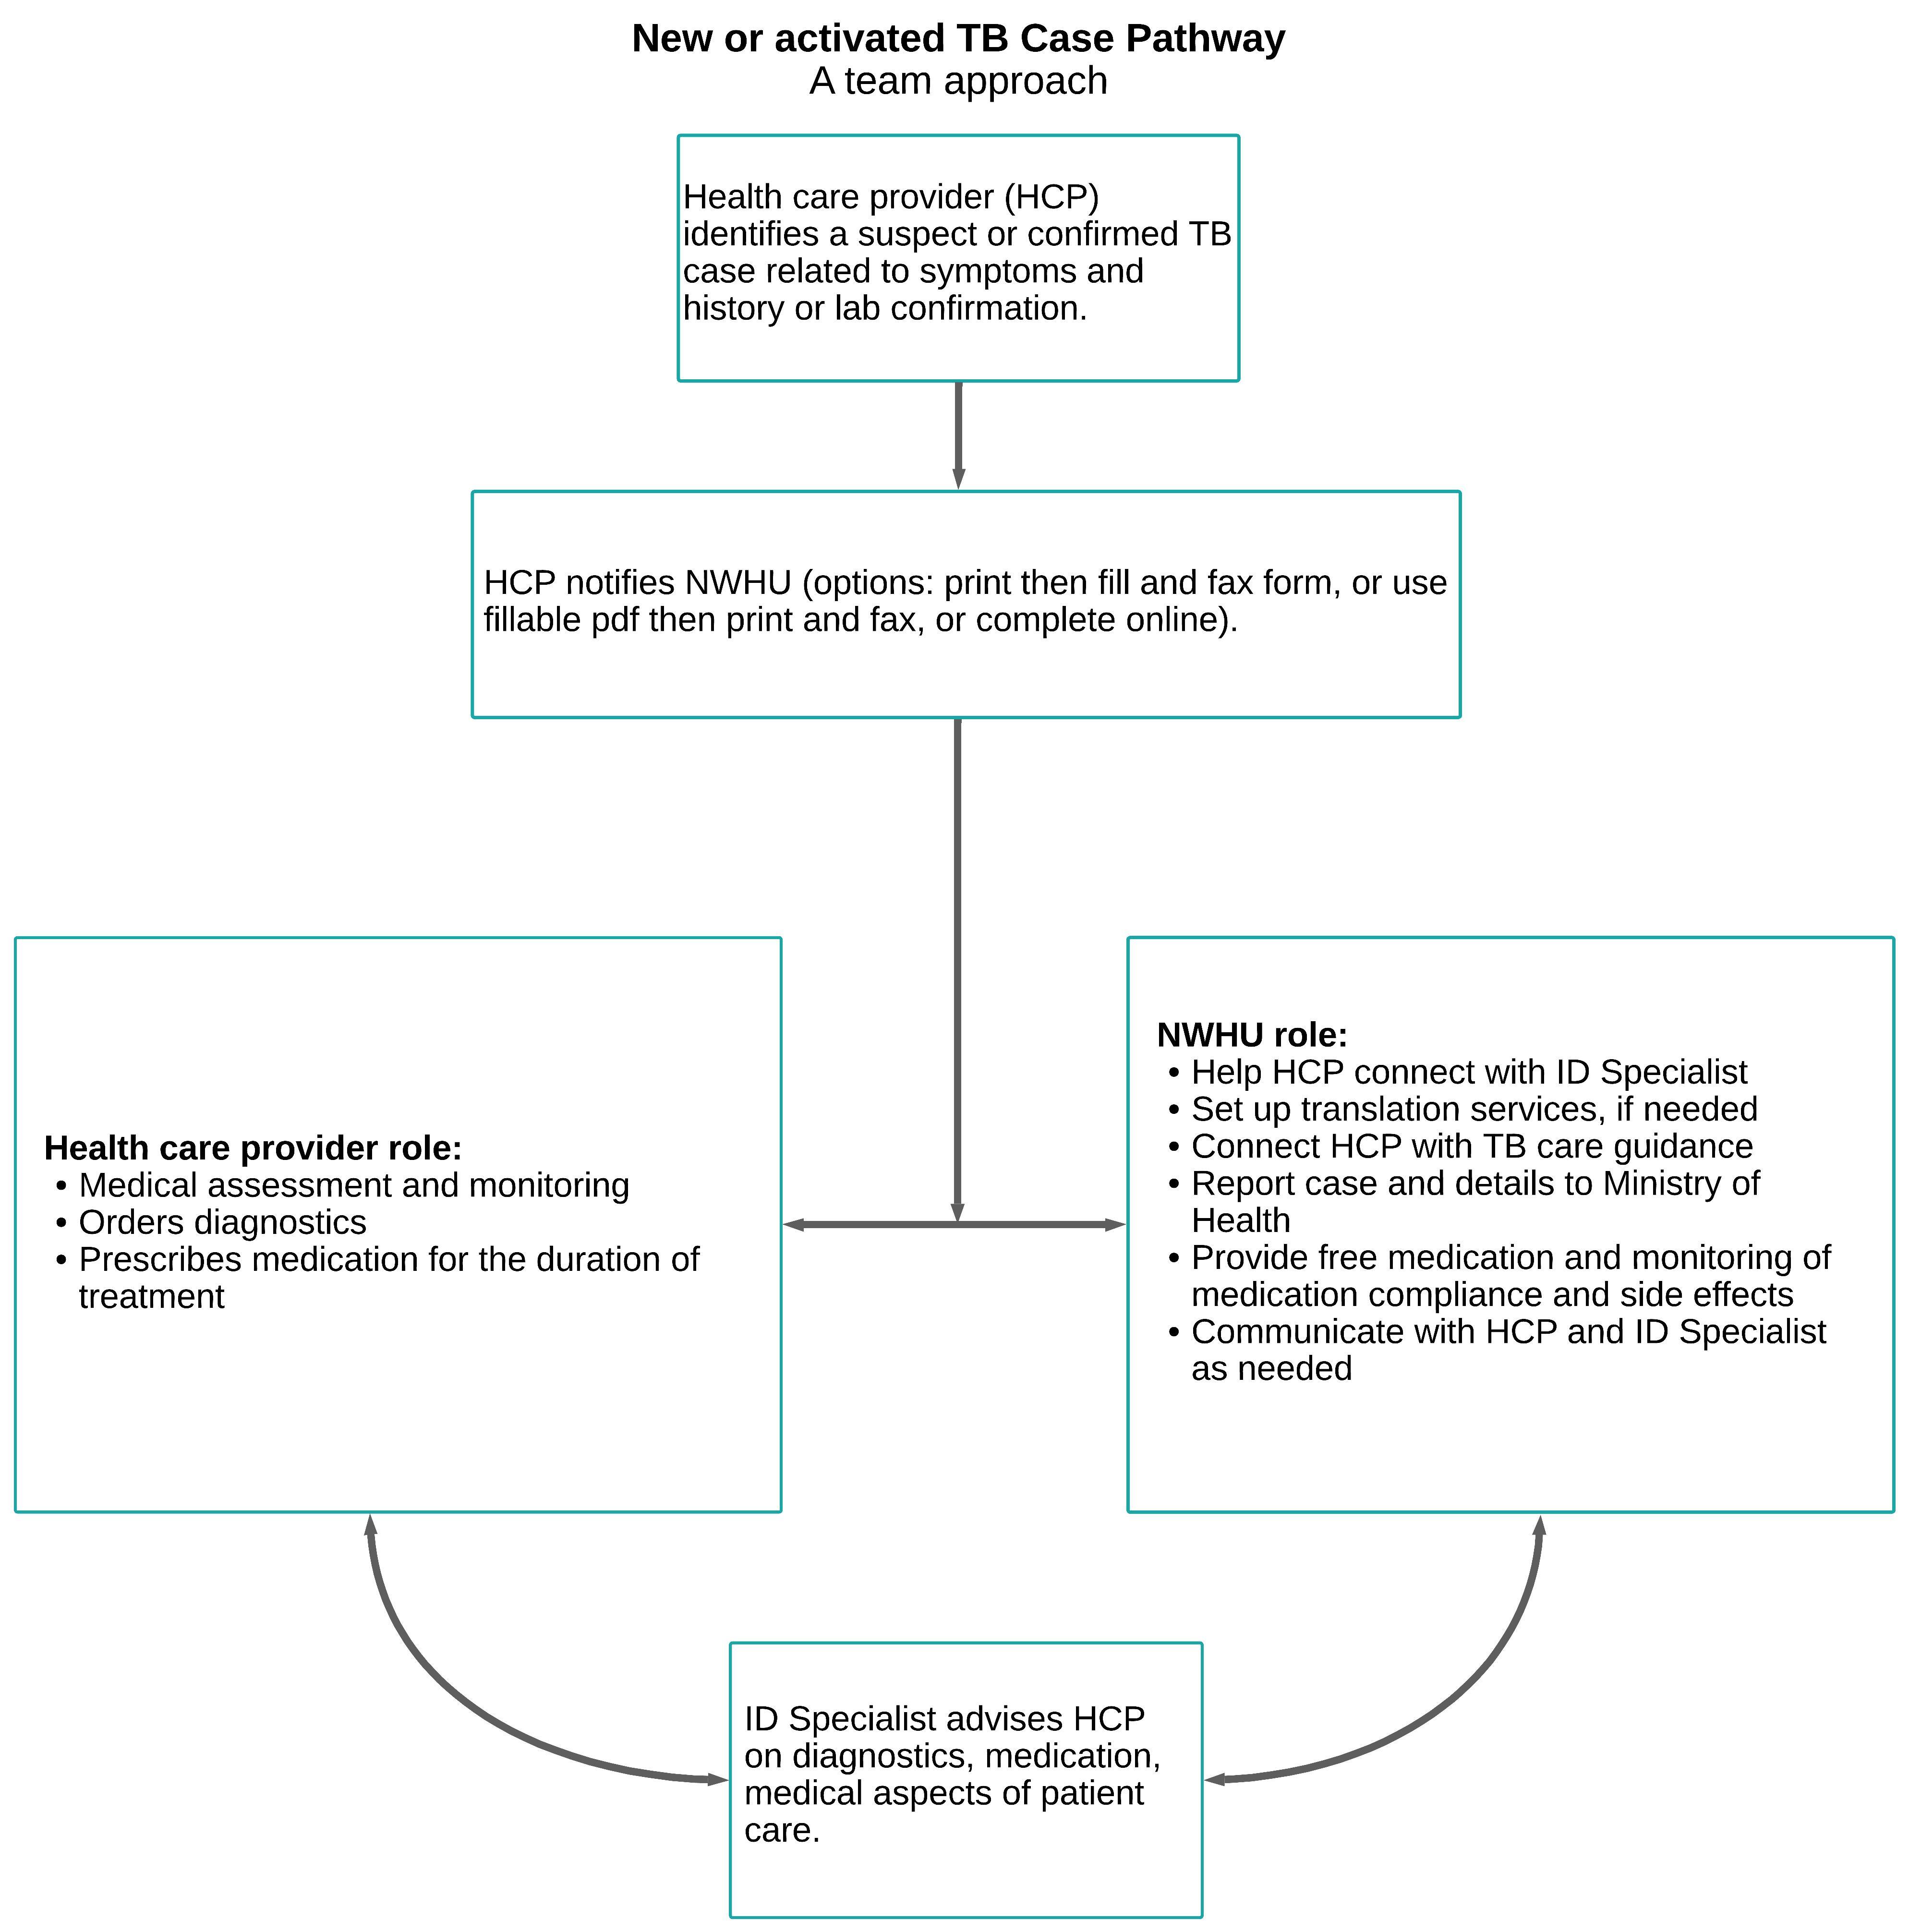 This image shows the new or activated TB case pathway. Specifically, if a health care provider identifies a suspect or confirmed TB case, they notify NWHU. The health care provider and NHWHU then complete specific steps.